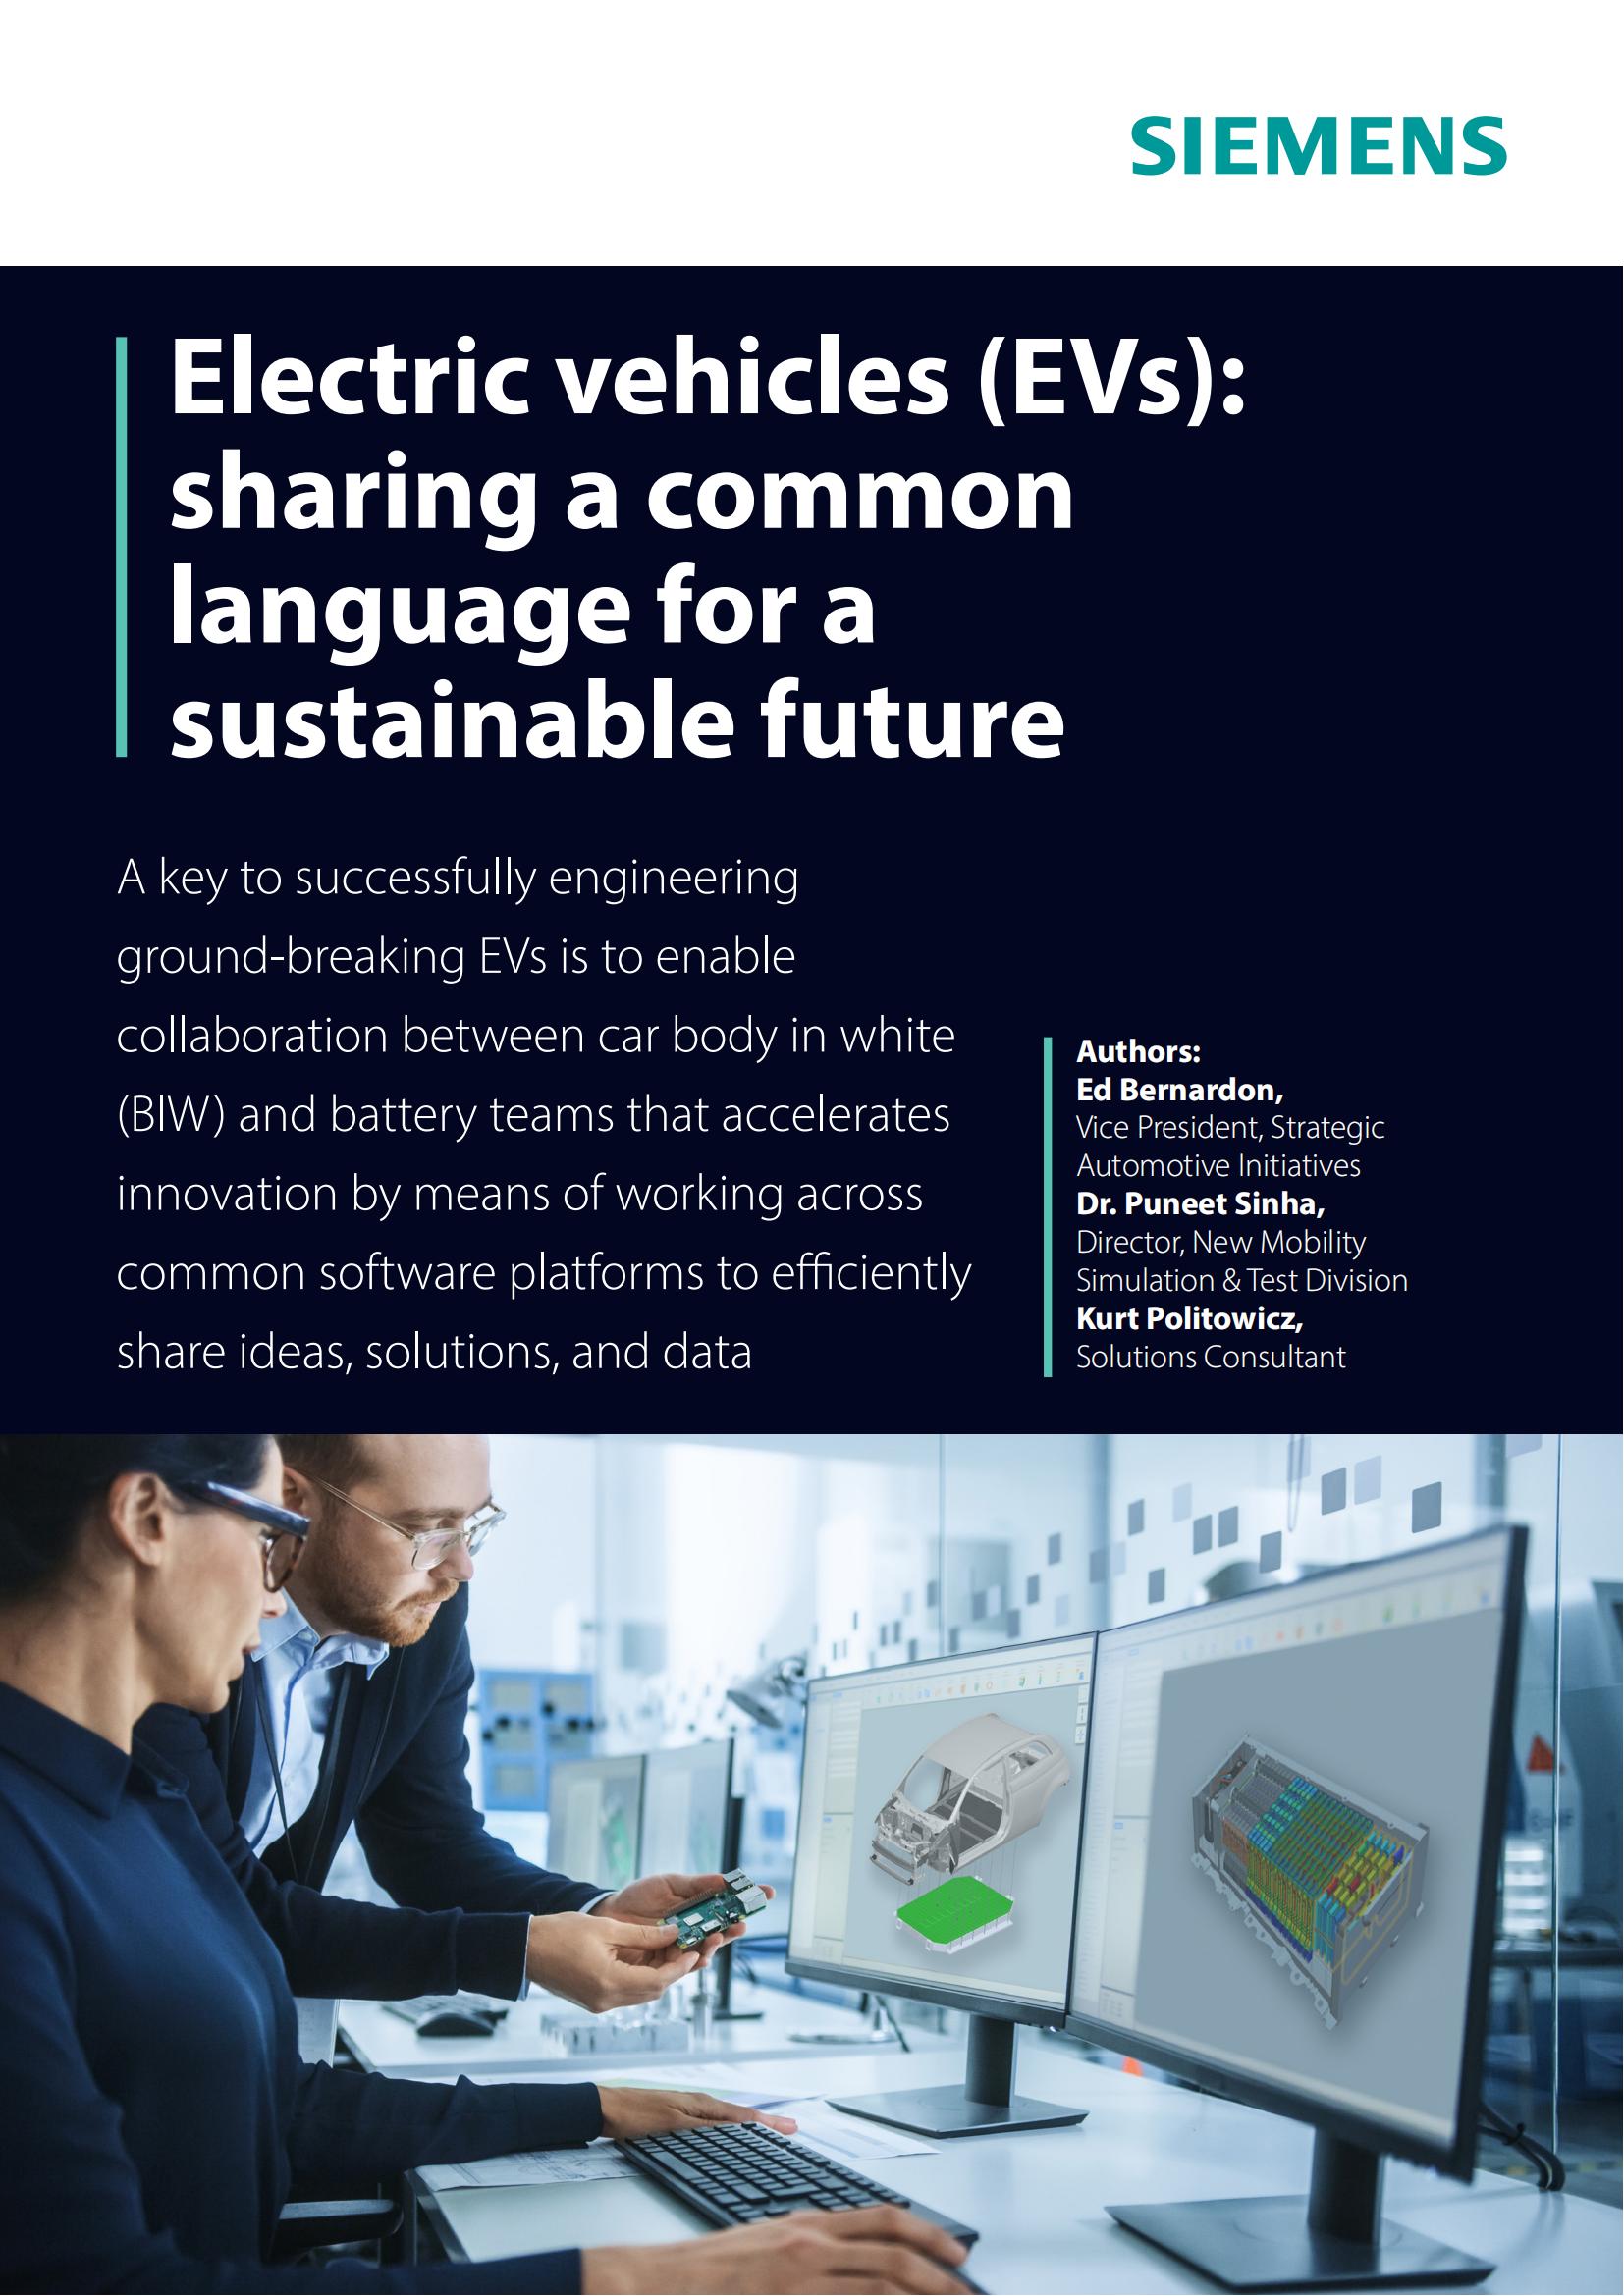 Electric vehicles (EVs): Sharing a common language for a sustainable future